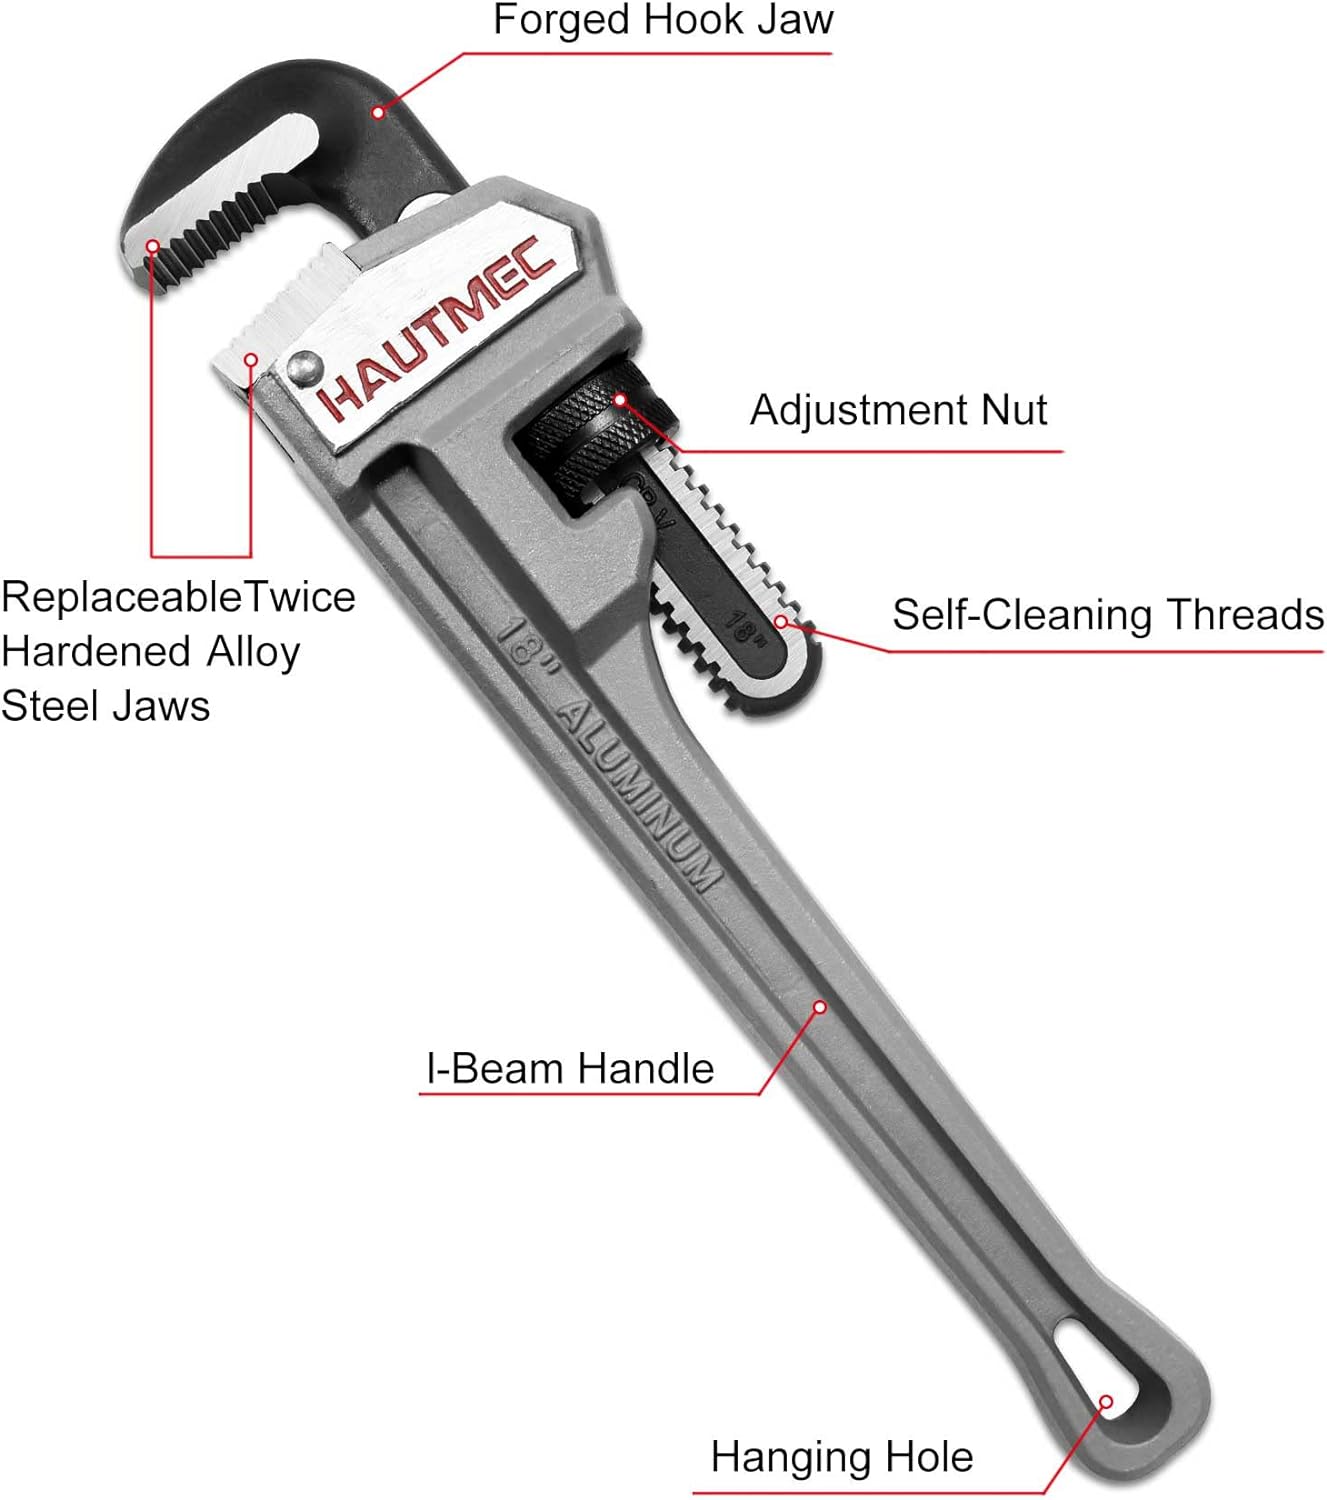 HAUTMEC 18 Inch Aluminum Straight Pipe Wrench,Heavy Duty Adjustable Plumbing Wrench, 2-1/2" Jaw Capacity,for Pipes, Tees, Ball Valves and Other Objects HT0186-PW